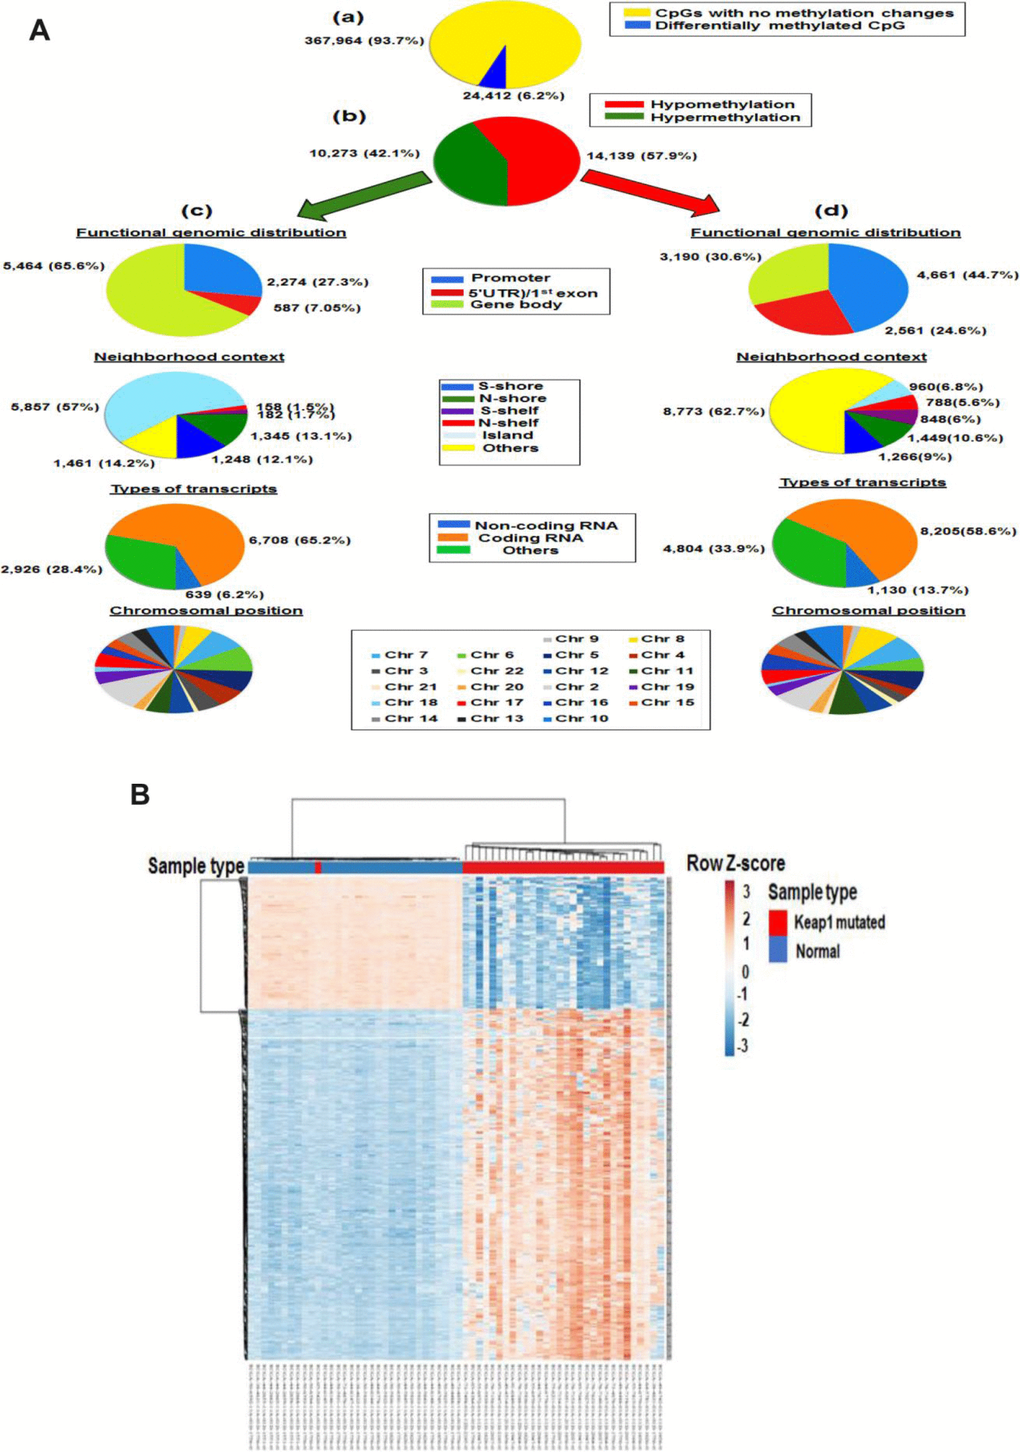 Differential methylation analysis of samples from KEAP1-mutated LUAD patients vs normal samples. (A) Graphic showing 450k DNA methylation analysis. (a) Graphic showing percentage of differentially-methylated CpG sites in KEAP1-mutated LUAD patients compared to normal samples. (b) Percentages of hypomethylation and hypermethylation. (c) Distribution of hypermethylated CpG sites in KEAP1-mutated patient samples according to functional genomic distribution, neighborhood context, associated RNA transcripts, and chromosomal location. (d) Distribution of hypomethylated CpG sites in KEAP1-mutated patient samples according to functional genomic distribution, neighborhood context, associated RNA transcripts, and chromosomal location. (B) Heatmap showing the differentially-methylated CpG sites in KEAP1-mutated LUAD patients compared to normal individuals (delta β >|0.4|, p 